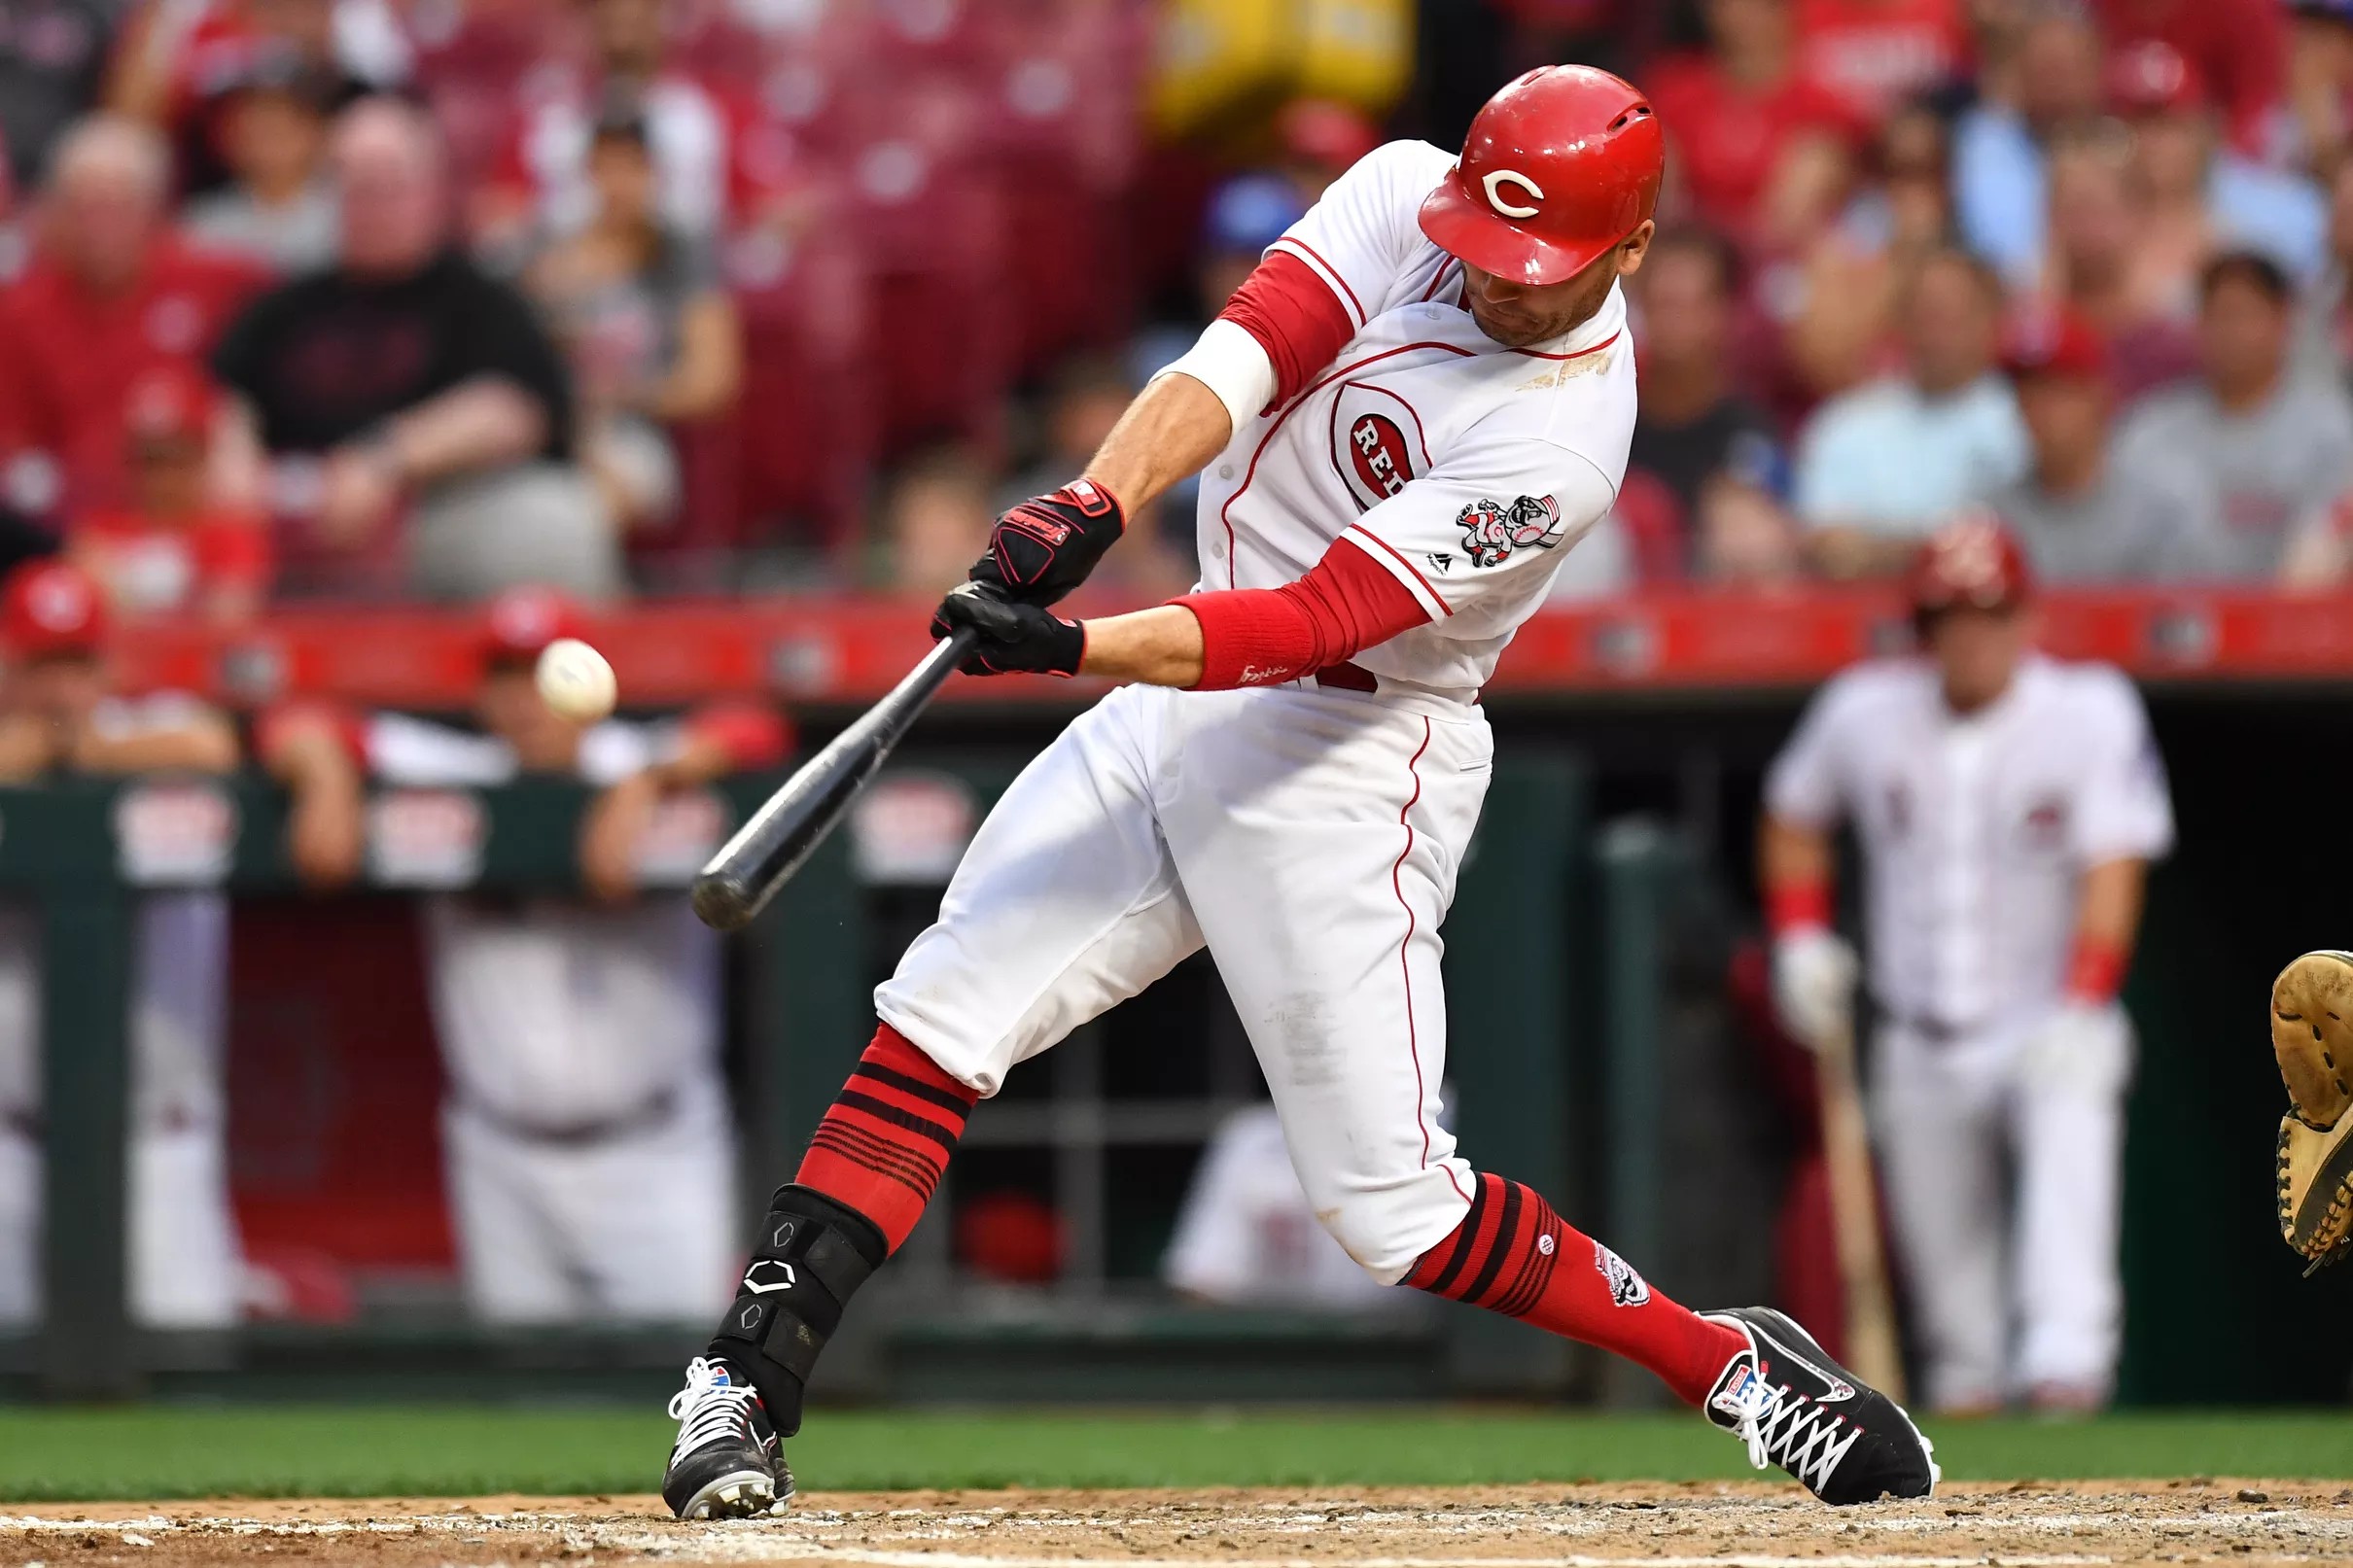 Updating the Top 100: Joey Votto